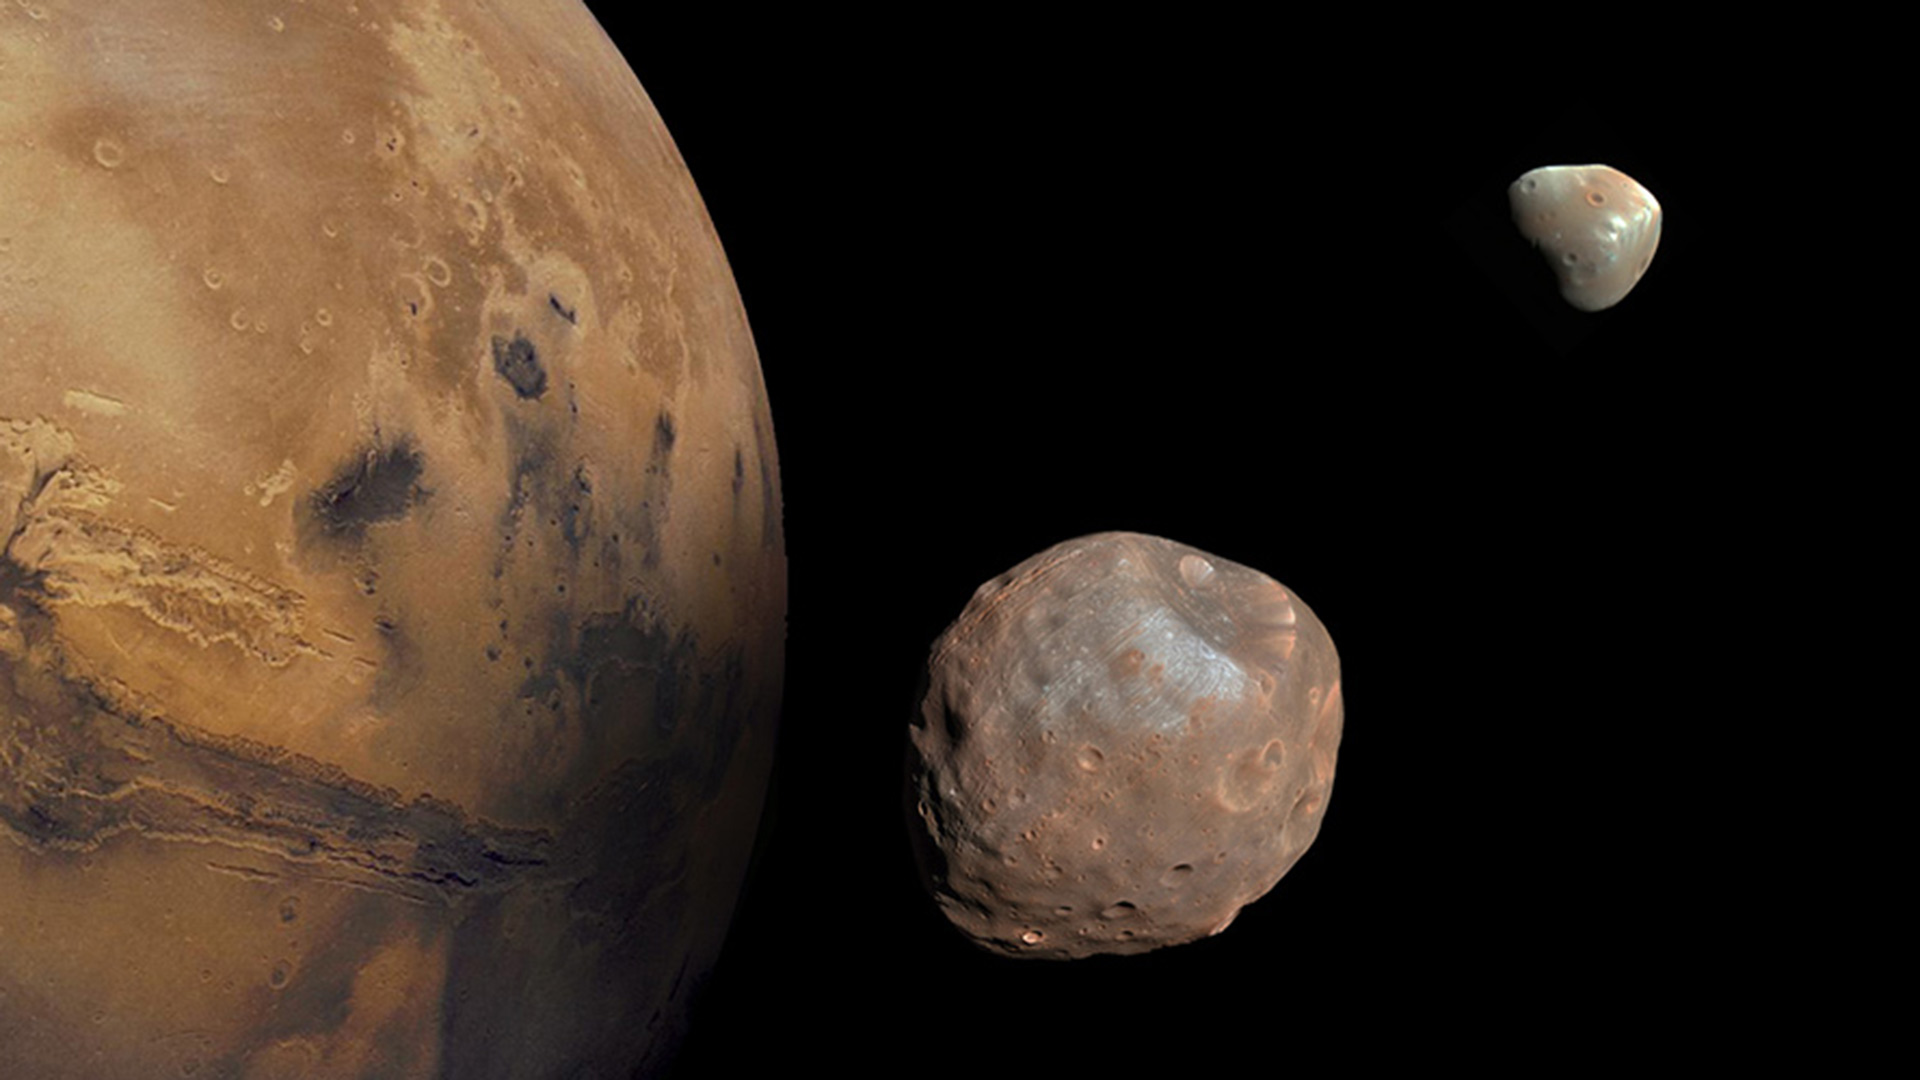 Lost photos suggest Mars’ mysterious moon Phobos may be a trapped comet in disguise Space